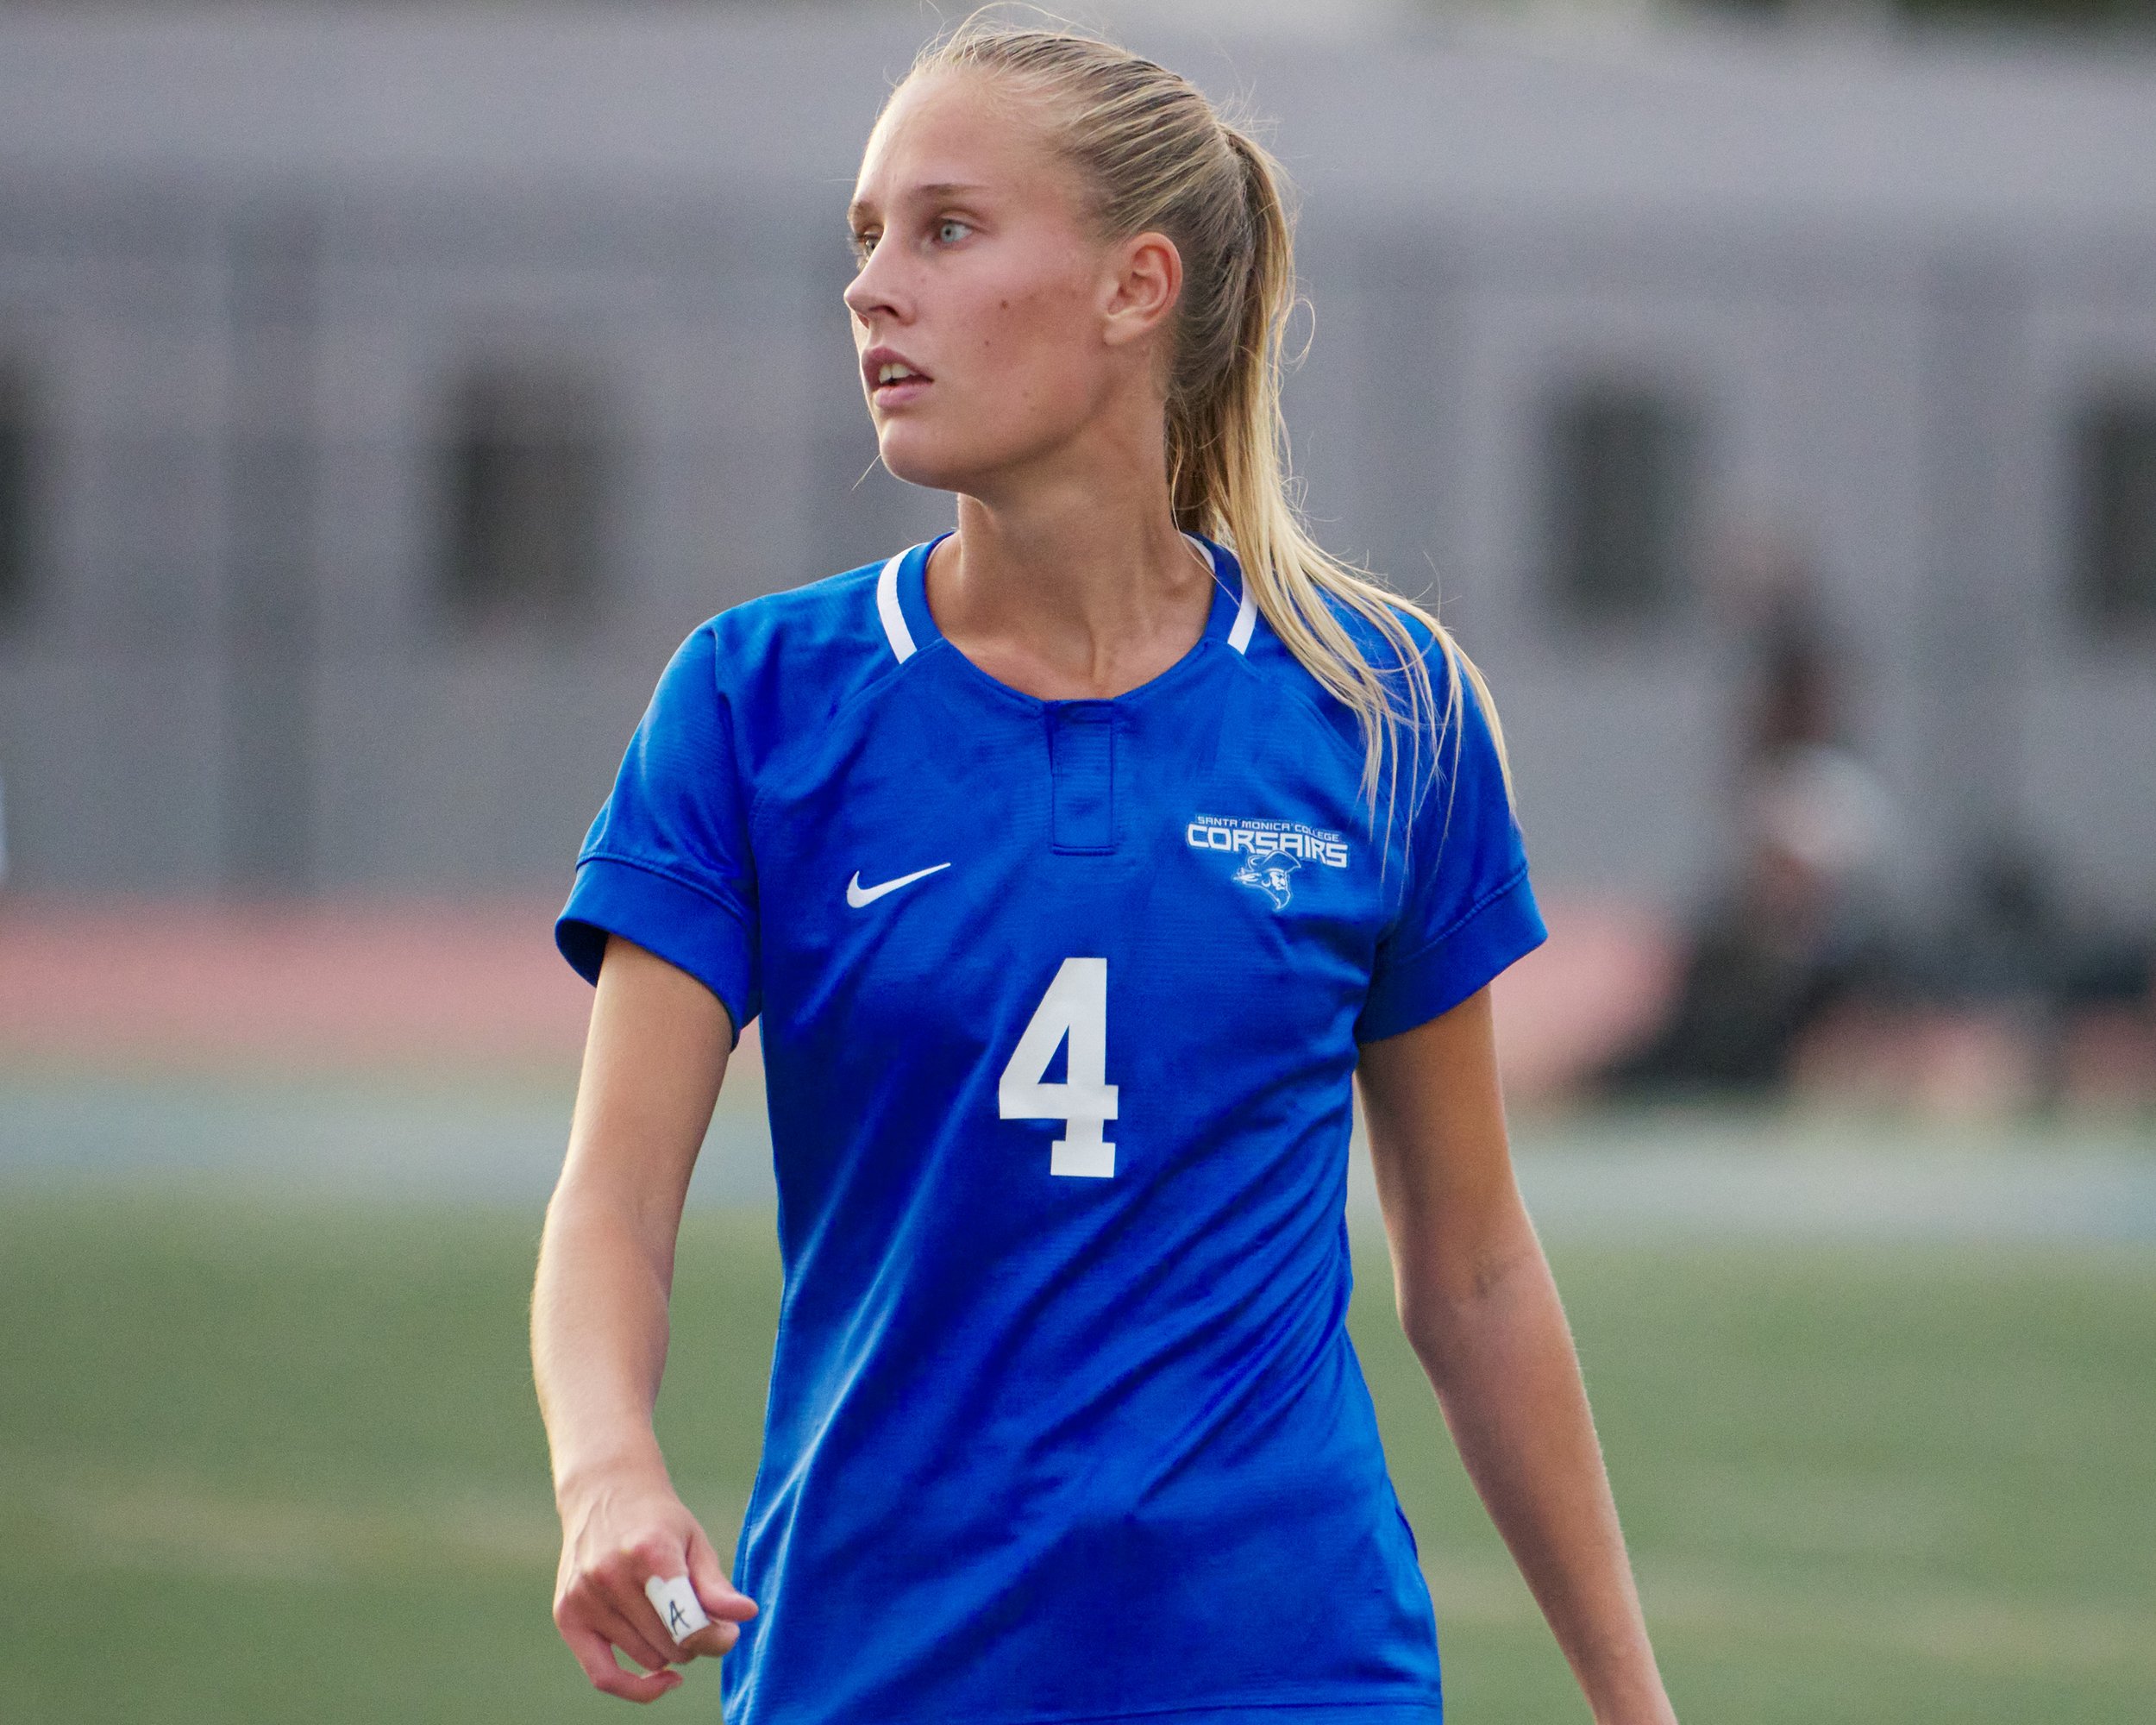  Santa Monica College Corsairs' Emma Rierstam during the women's soccer match against the Los Angeles Valley College Monarchs on Tuesday, Nov. 1, 2022, at Corsair Field in Santa Monica, Calif. The Corsairs won 2-1. (Nicholas McCall | The Corsair) 